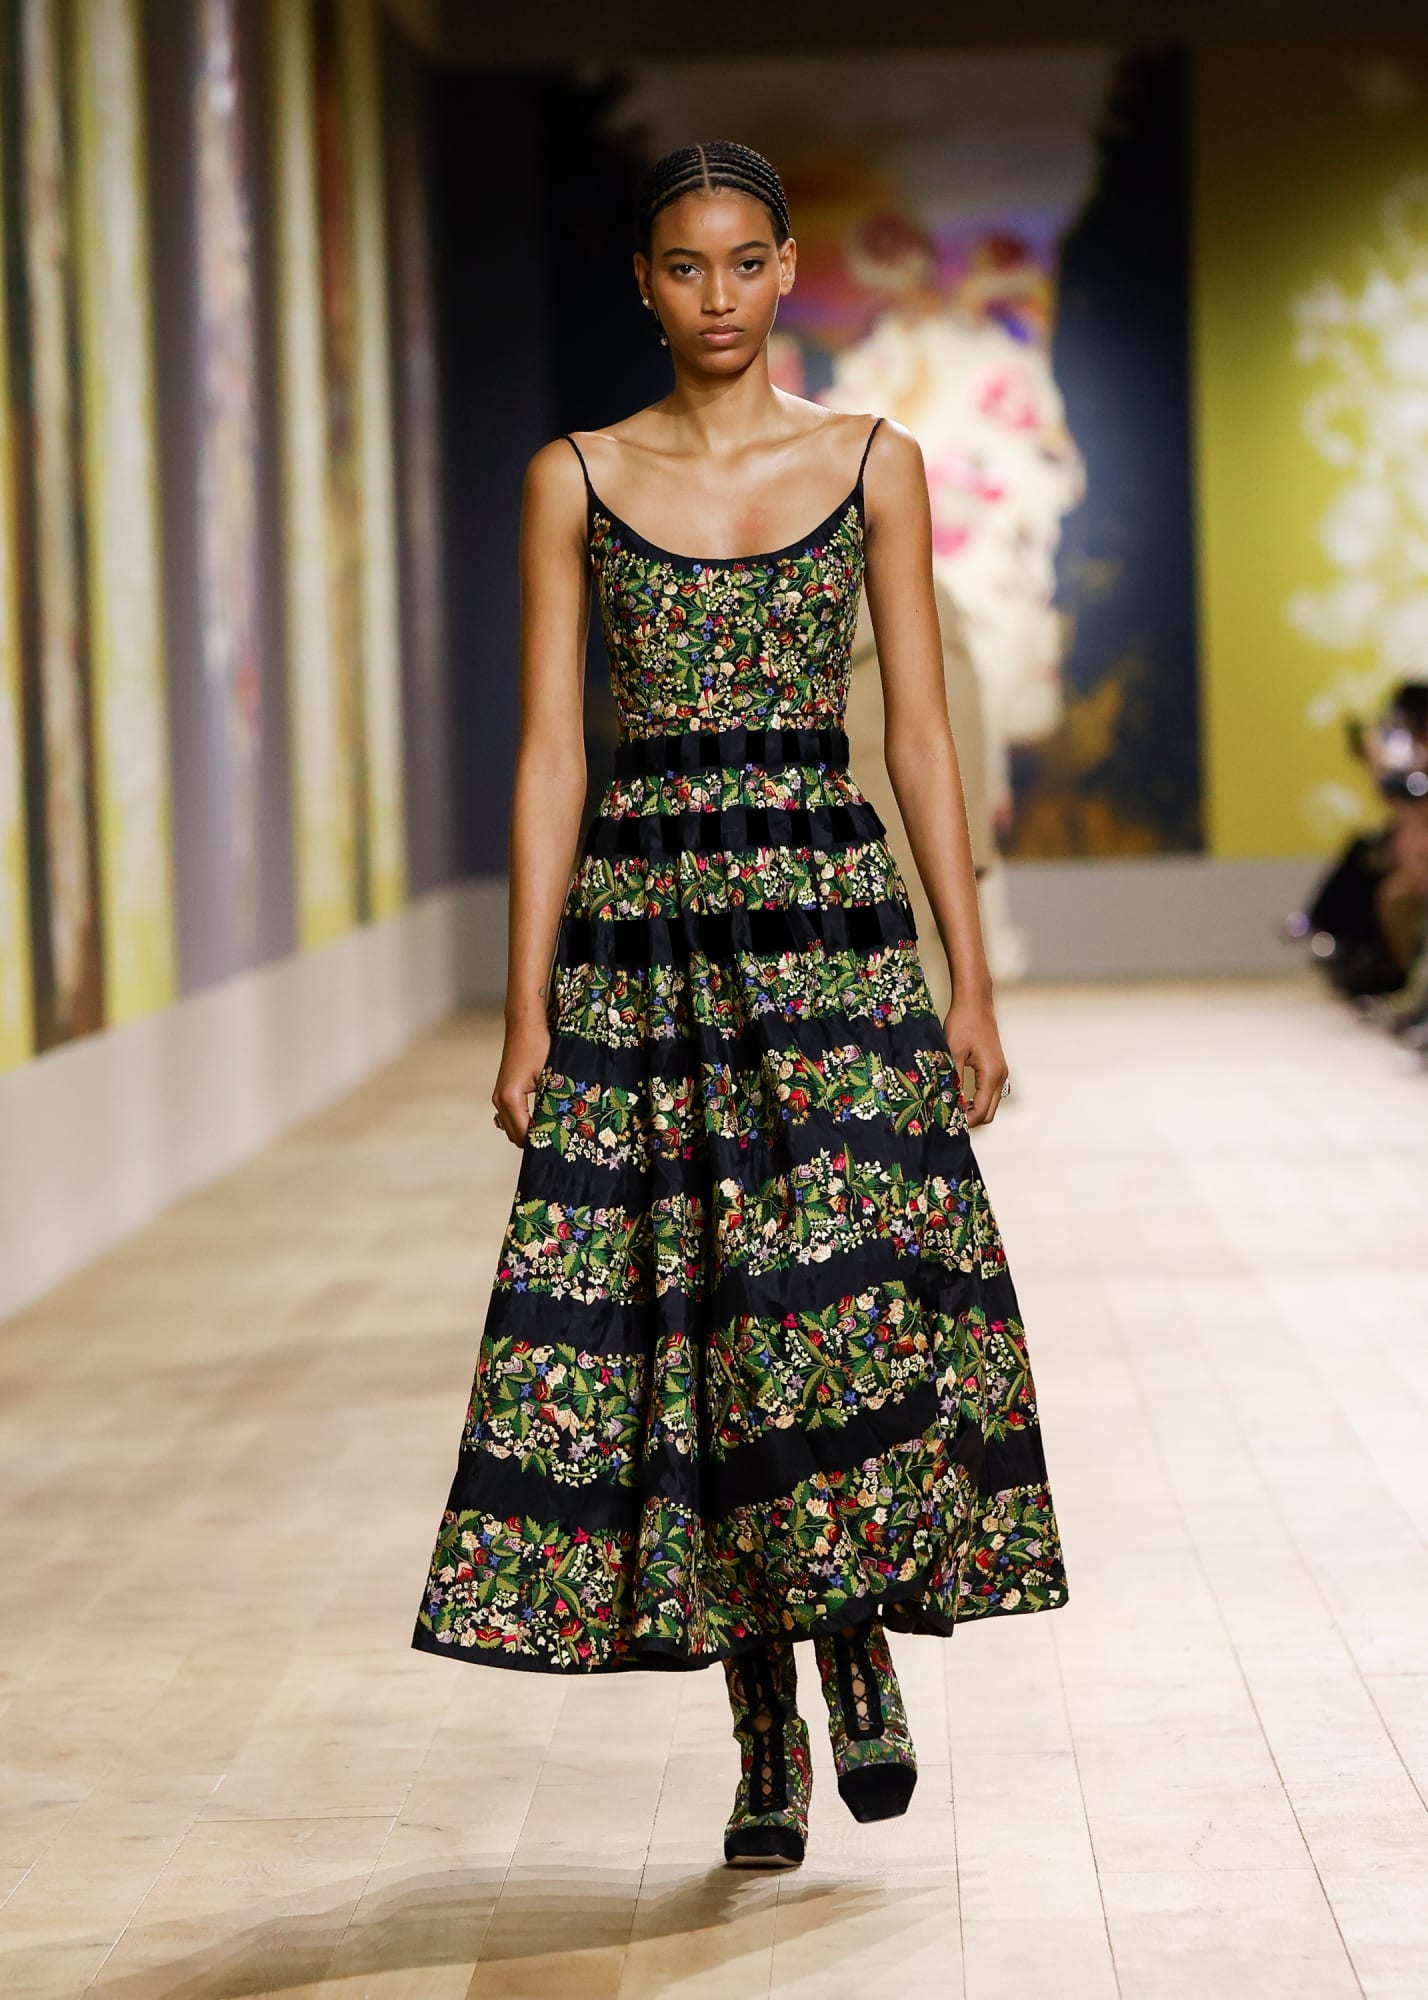 Dior model sports a dress covered in Ukrainian peasant flower motifs for Paris Fashion Week July 2022.